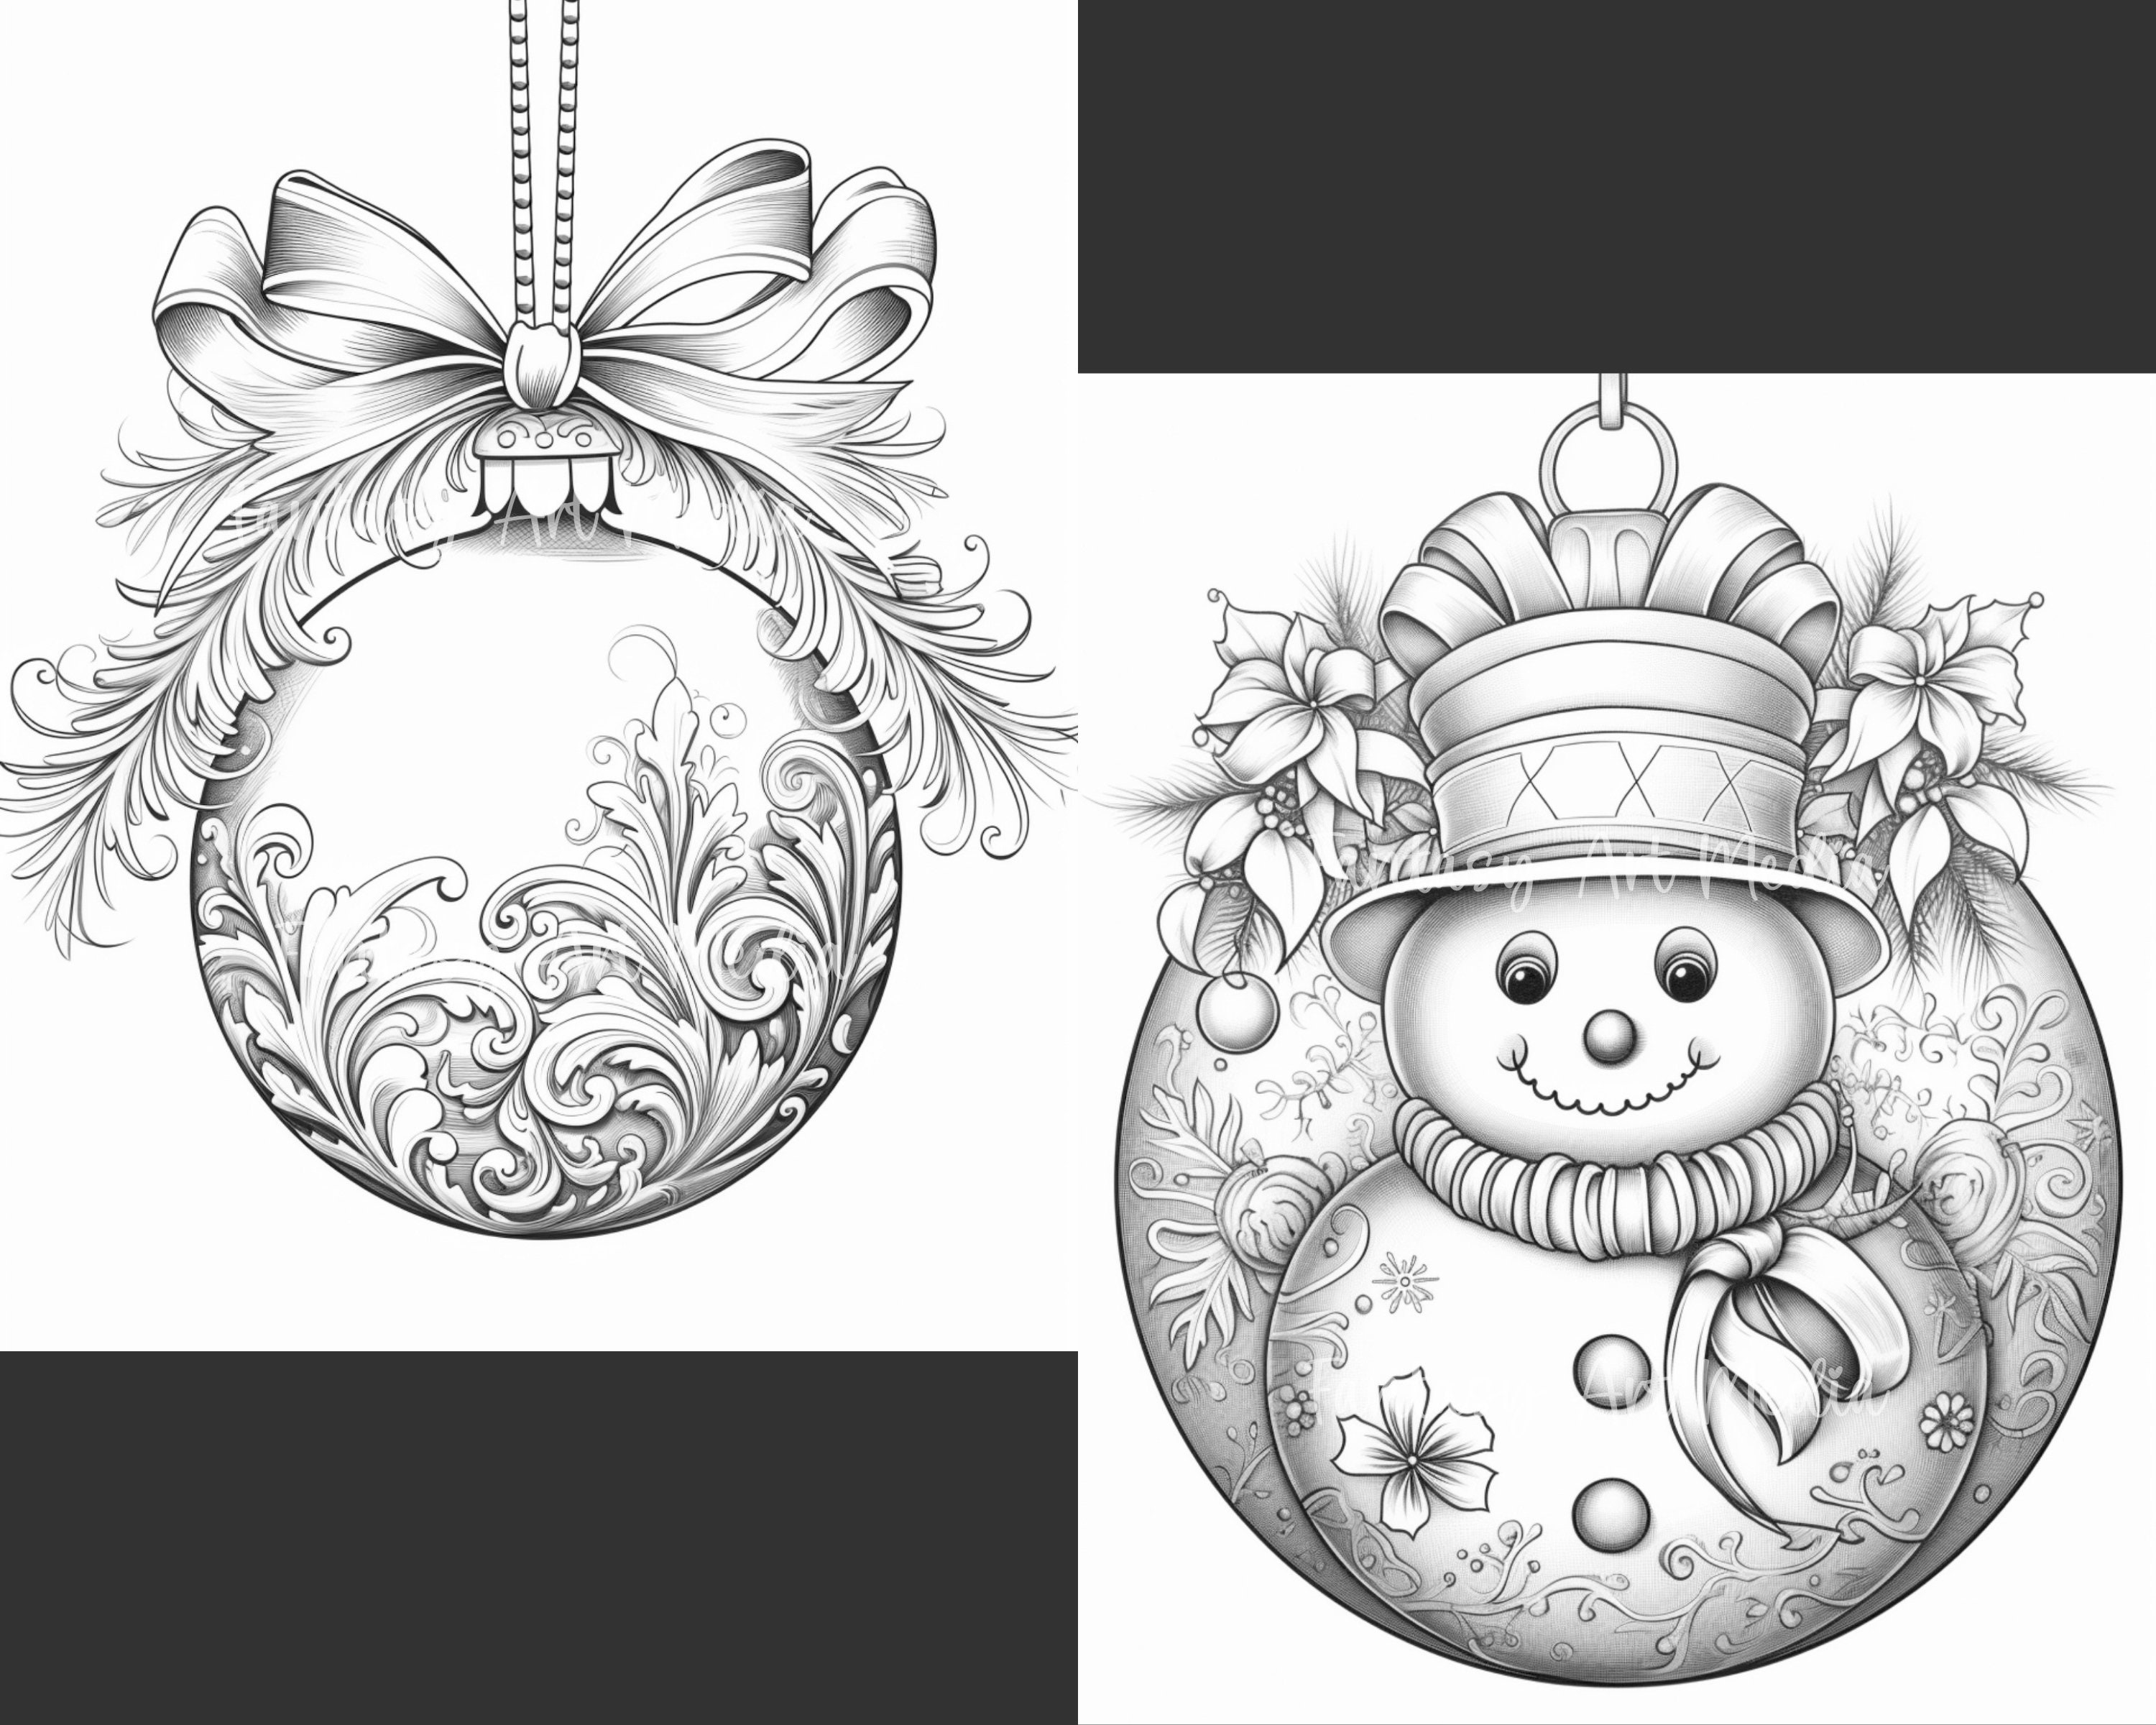 Christmas Coloring Paper Decorations Graphic by gyneenyg